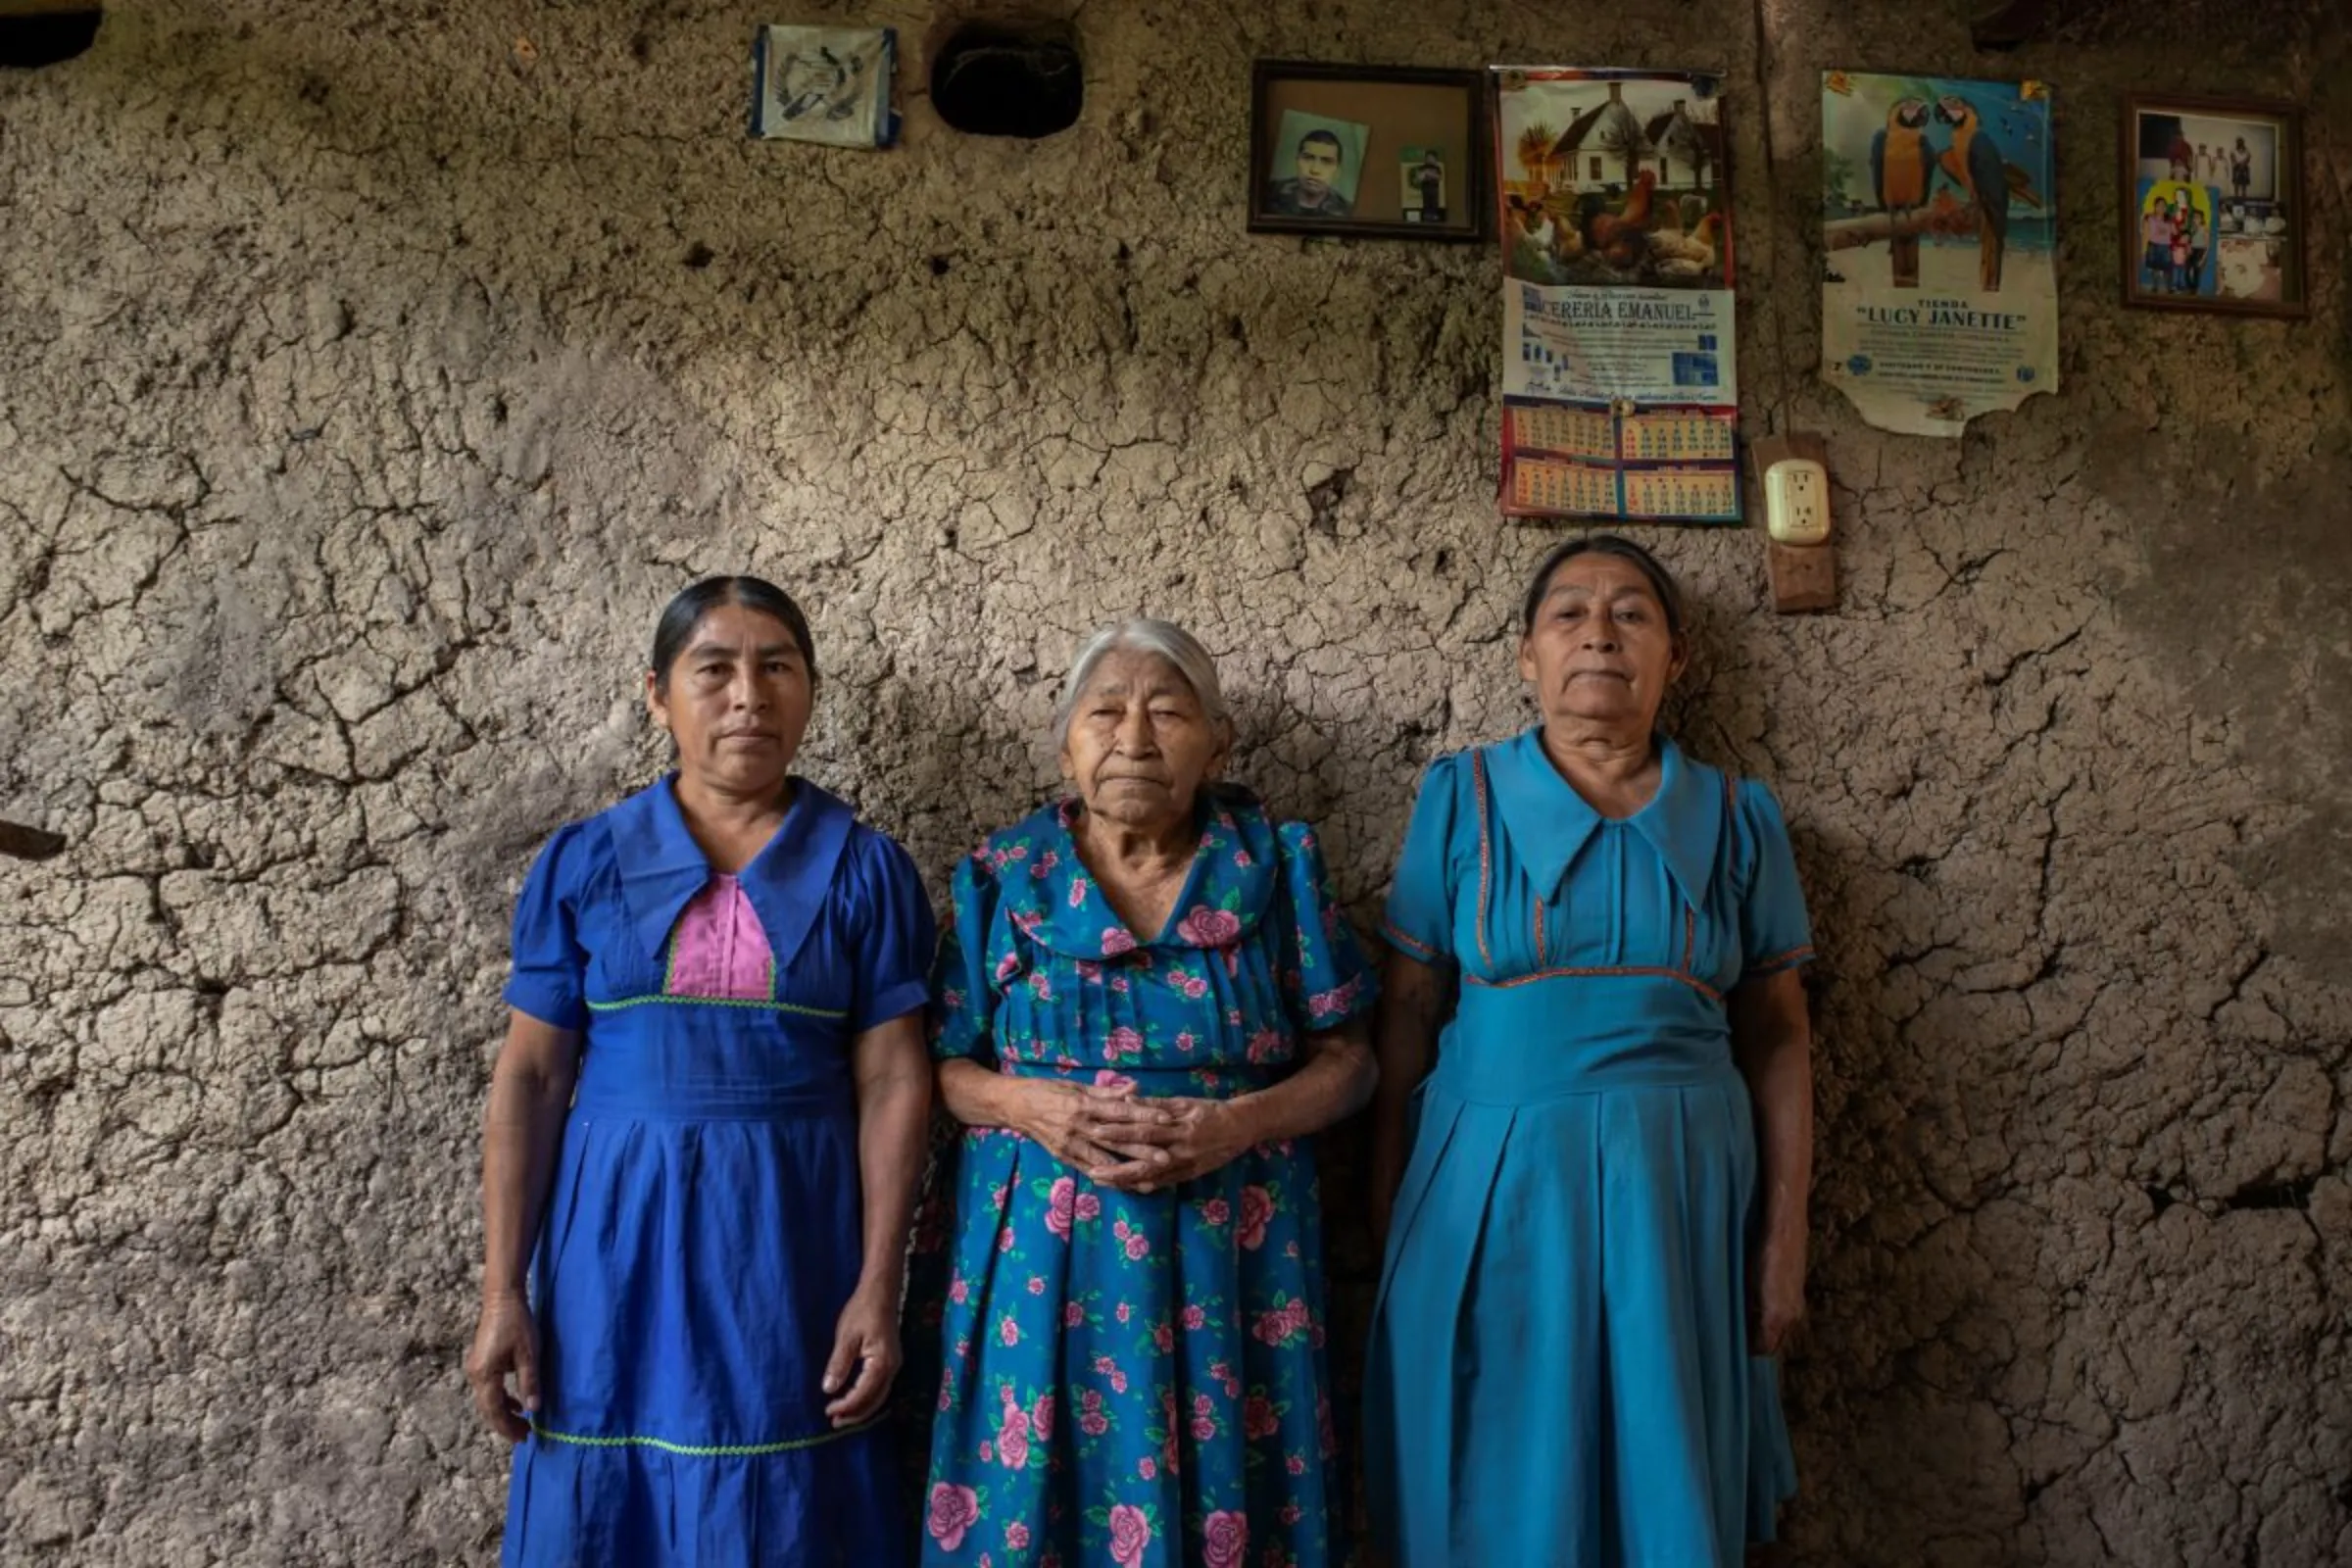 Monica Ramirez de Leon, left, with her grandmother and mother in her adobe home in a hamlet in the Camotán municipality in the province of Chiquimula, Guatemala, September 8, 2023. Thomson Reuters Foundation/Fabio Cuttica